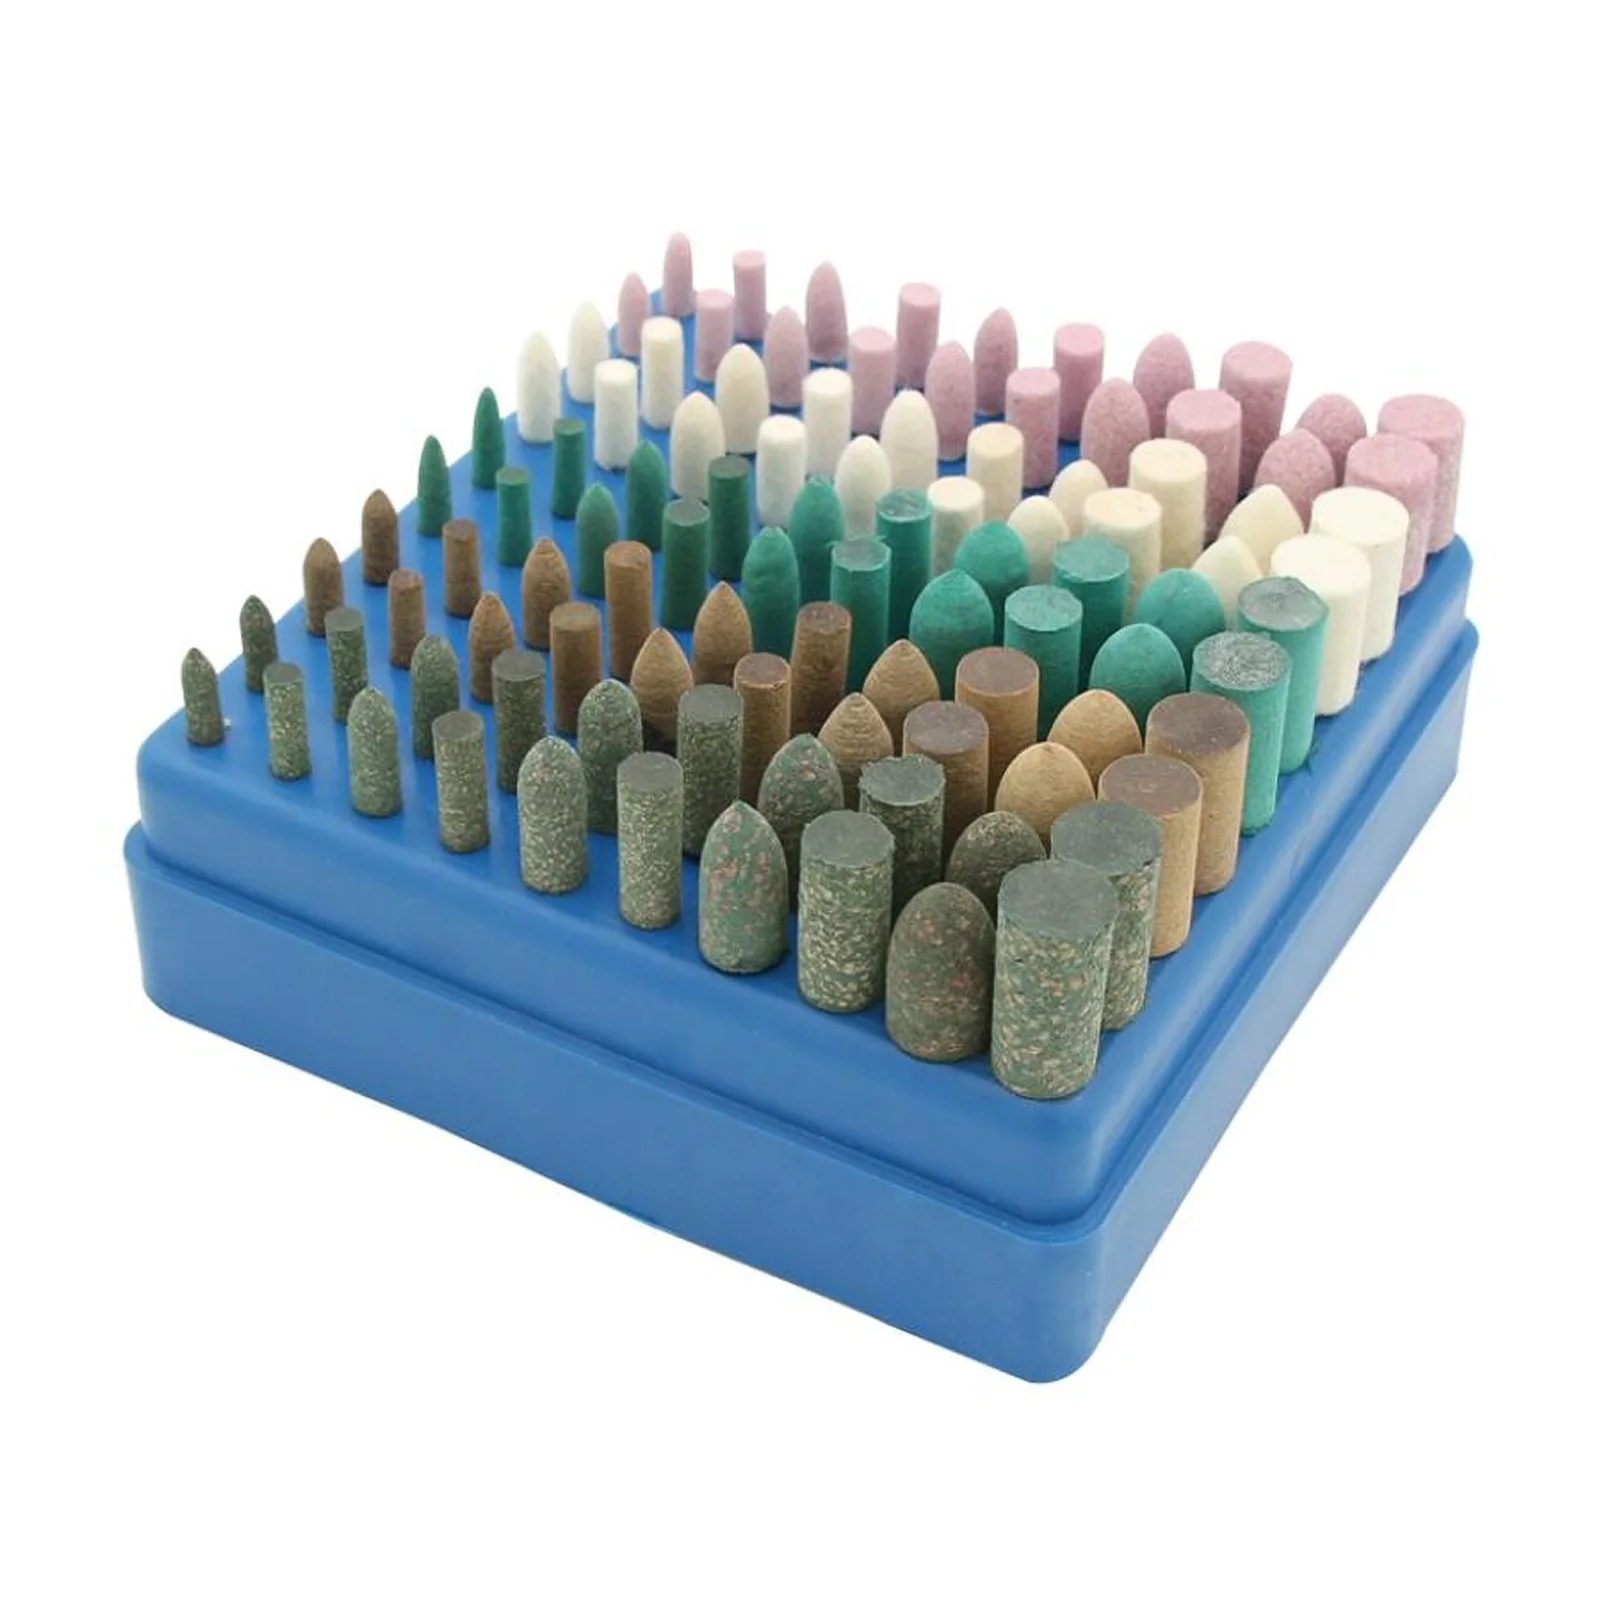 

100Pcs Electric Polishing Buffing Accessories Grinding Bits Set With Shank Wool Sesame Rubber Jade Cowhide Abrasive Rotary Tools